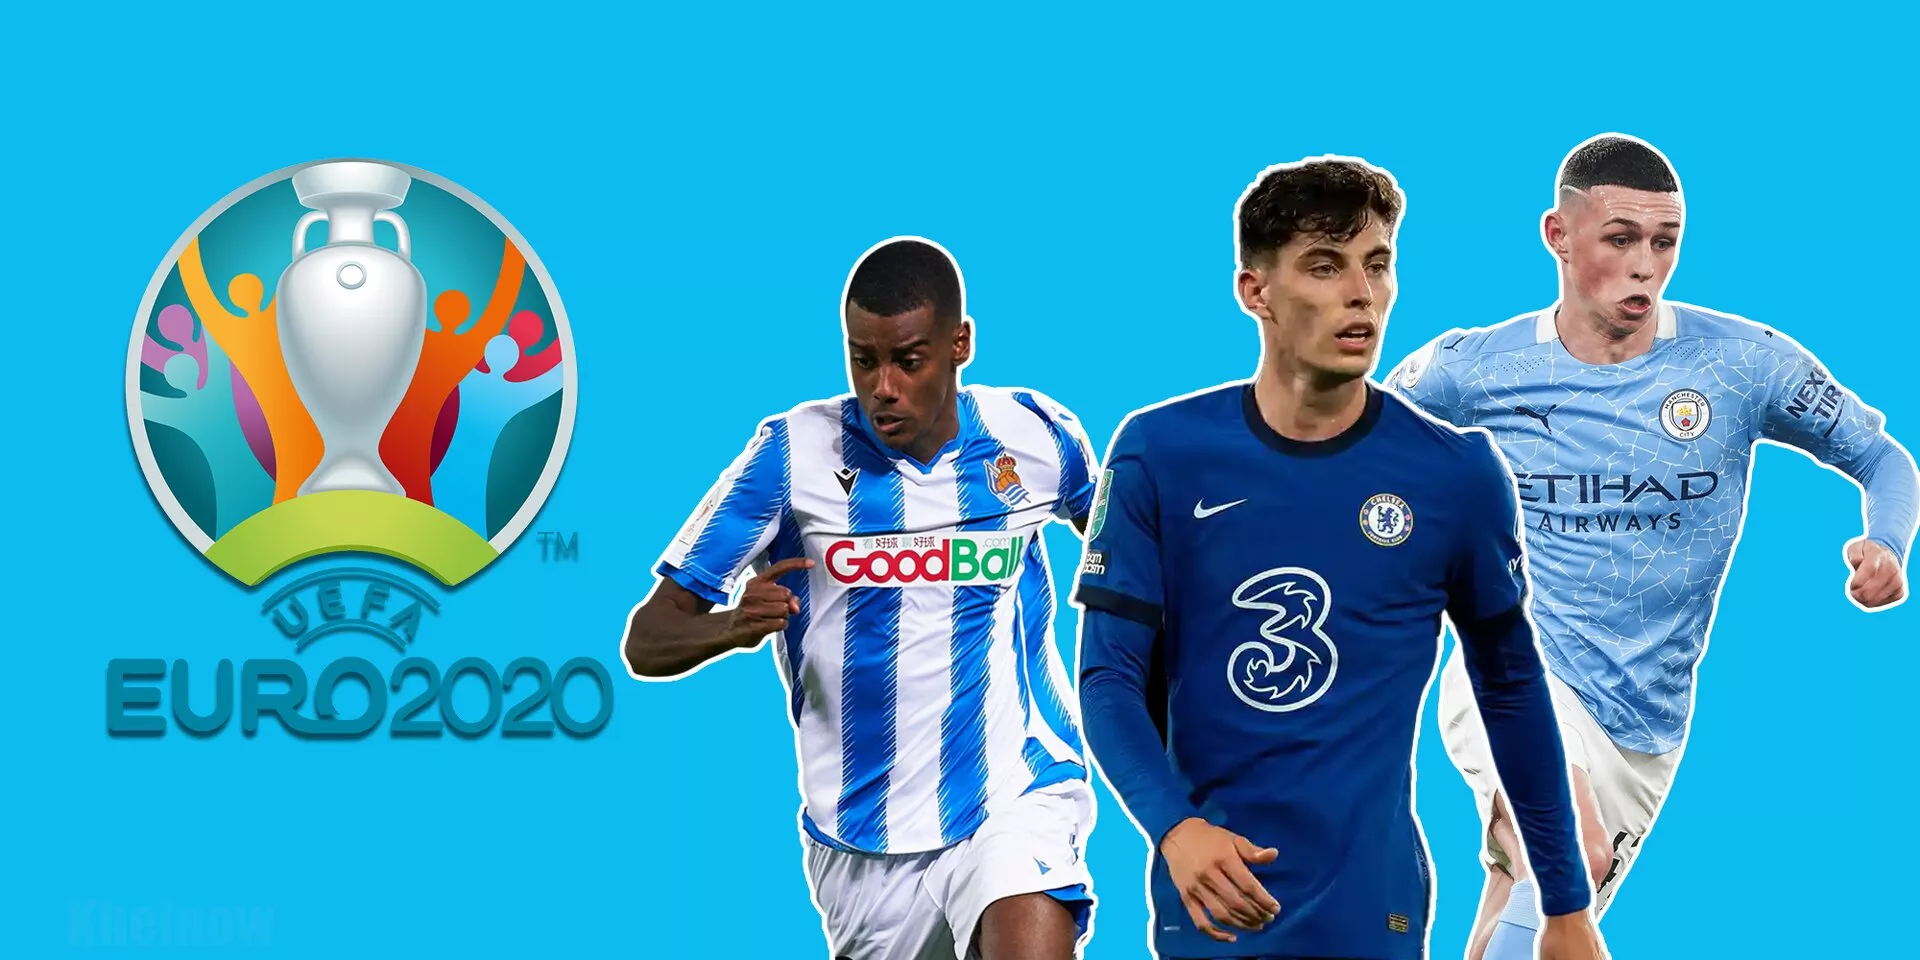 youngsters Euro 2020